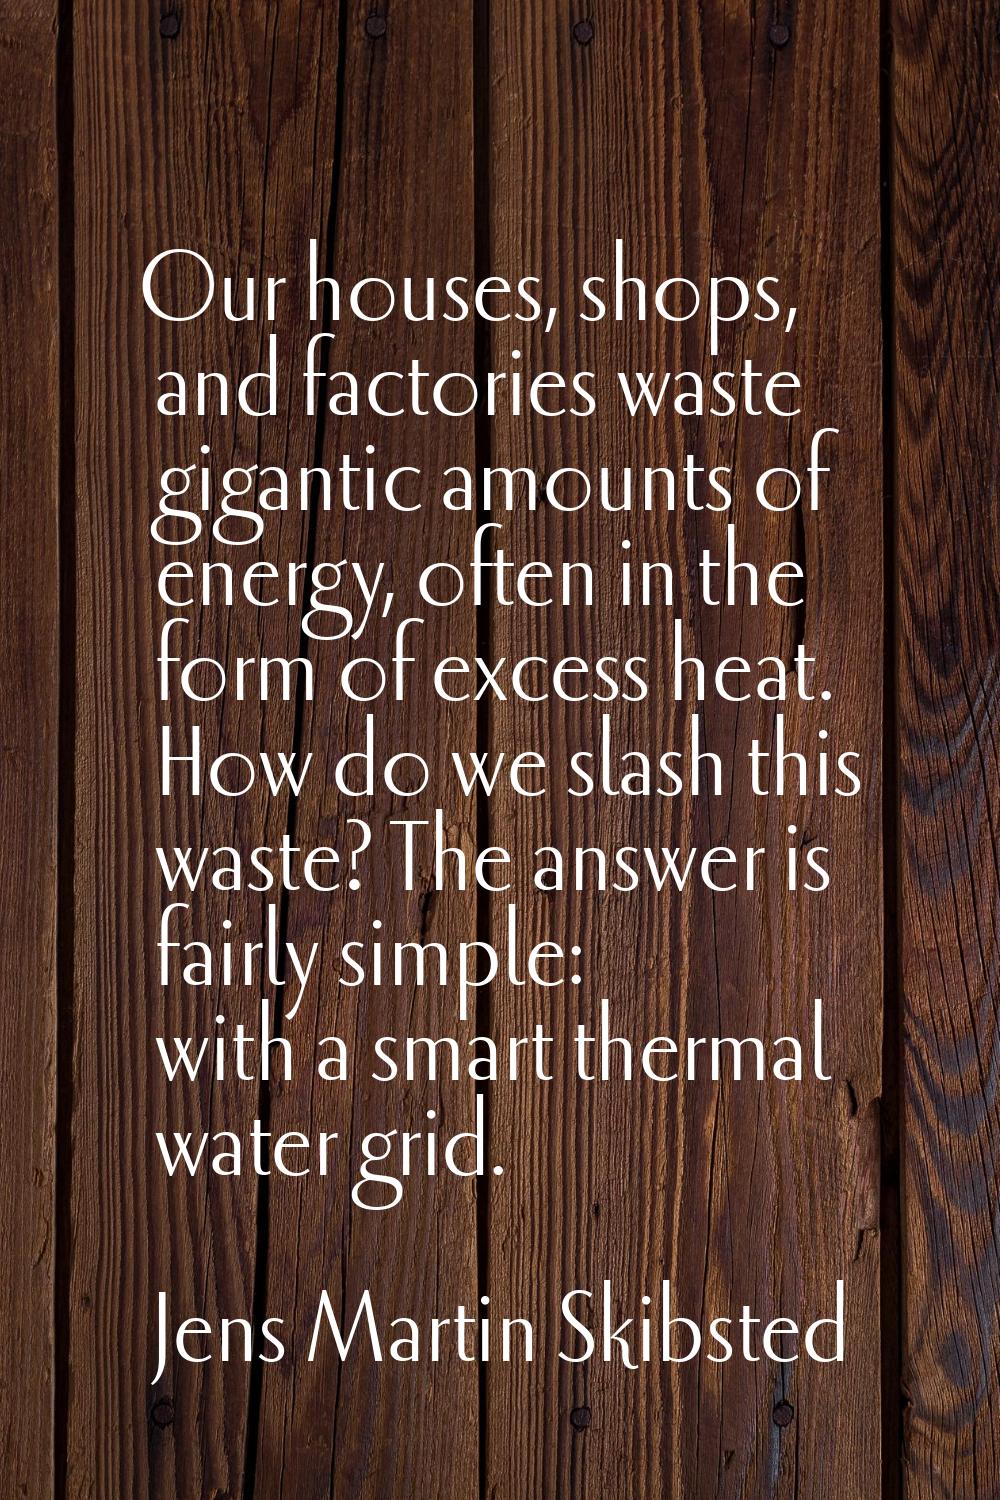 Our houses, shops, and factories waste gigantic amounts of energy, often in the form of excess heat